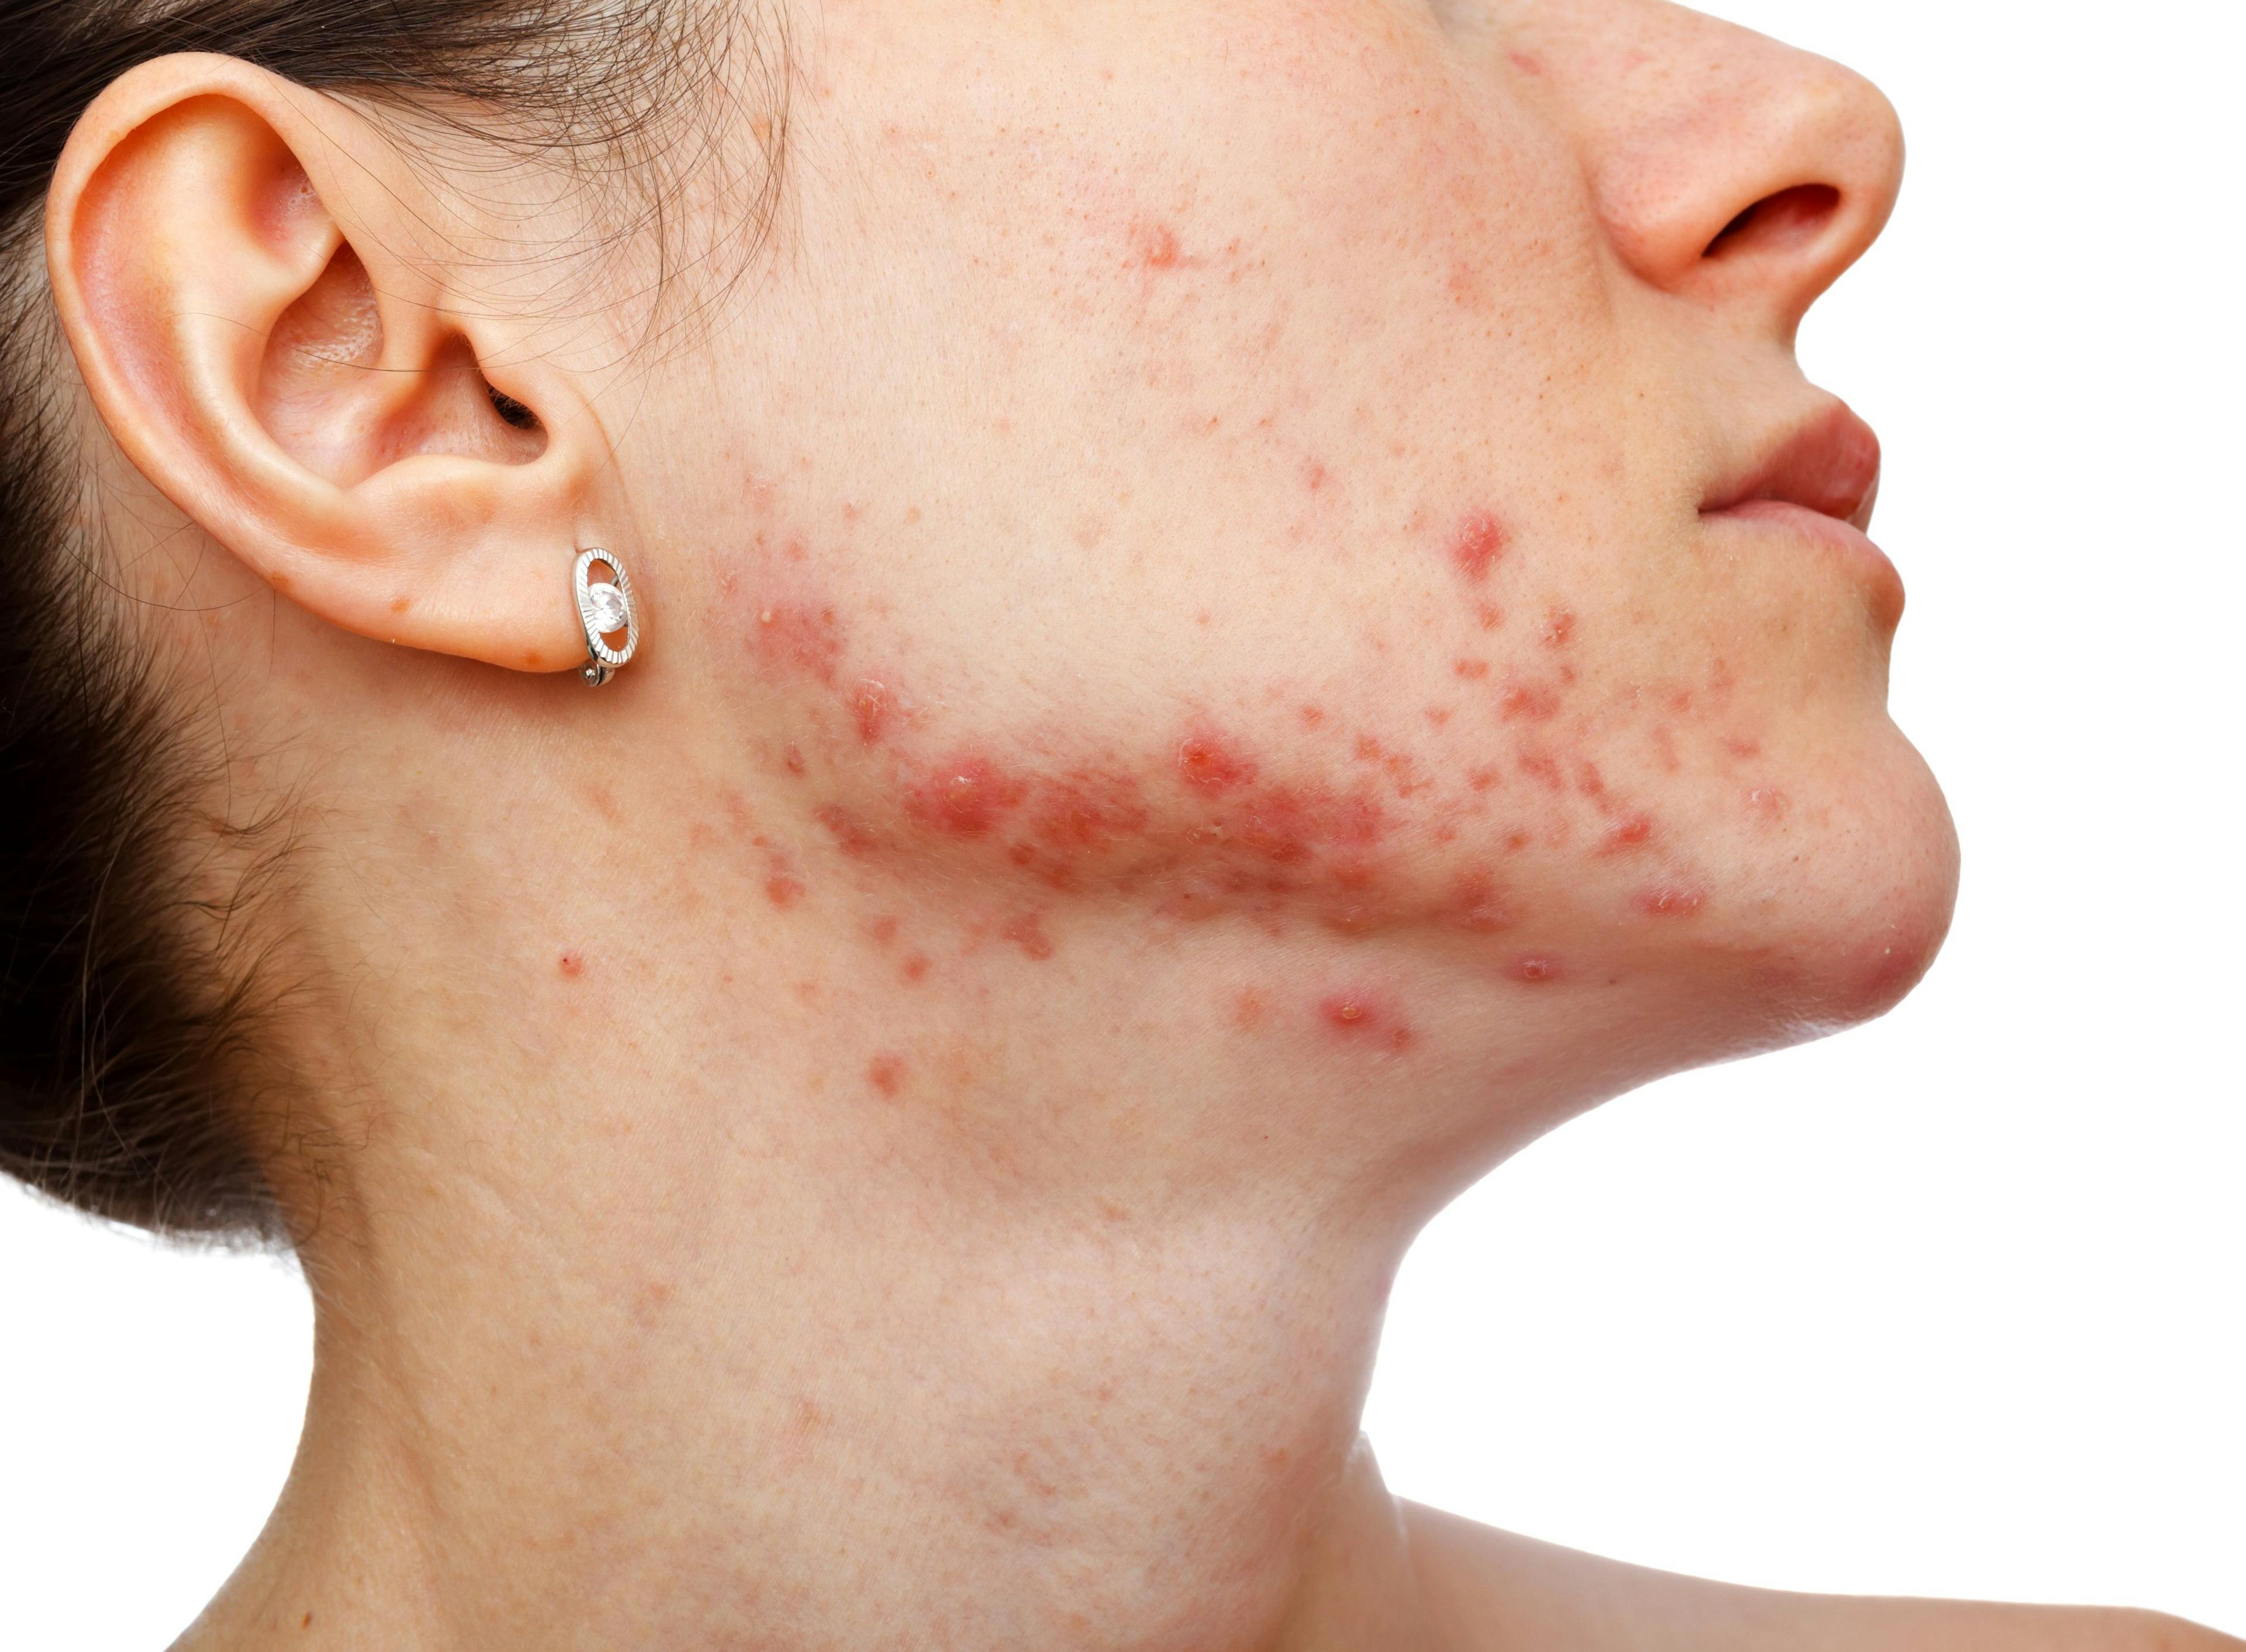 Research Finds Dermatology Visits for Acne Higher in Adult Female Patients